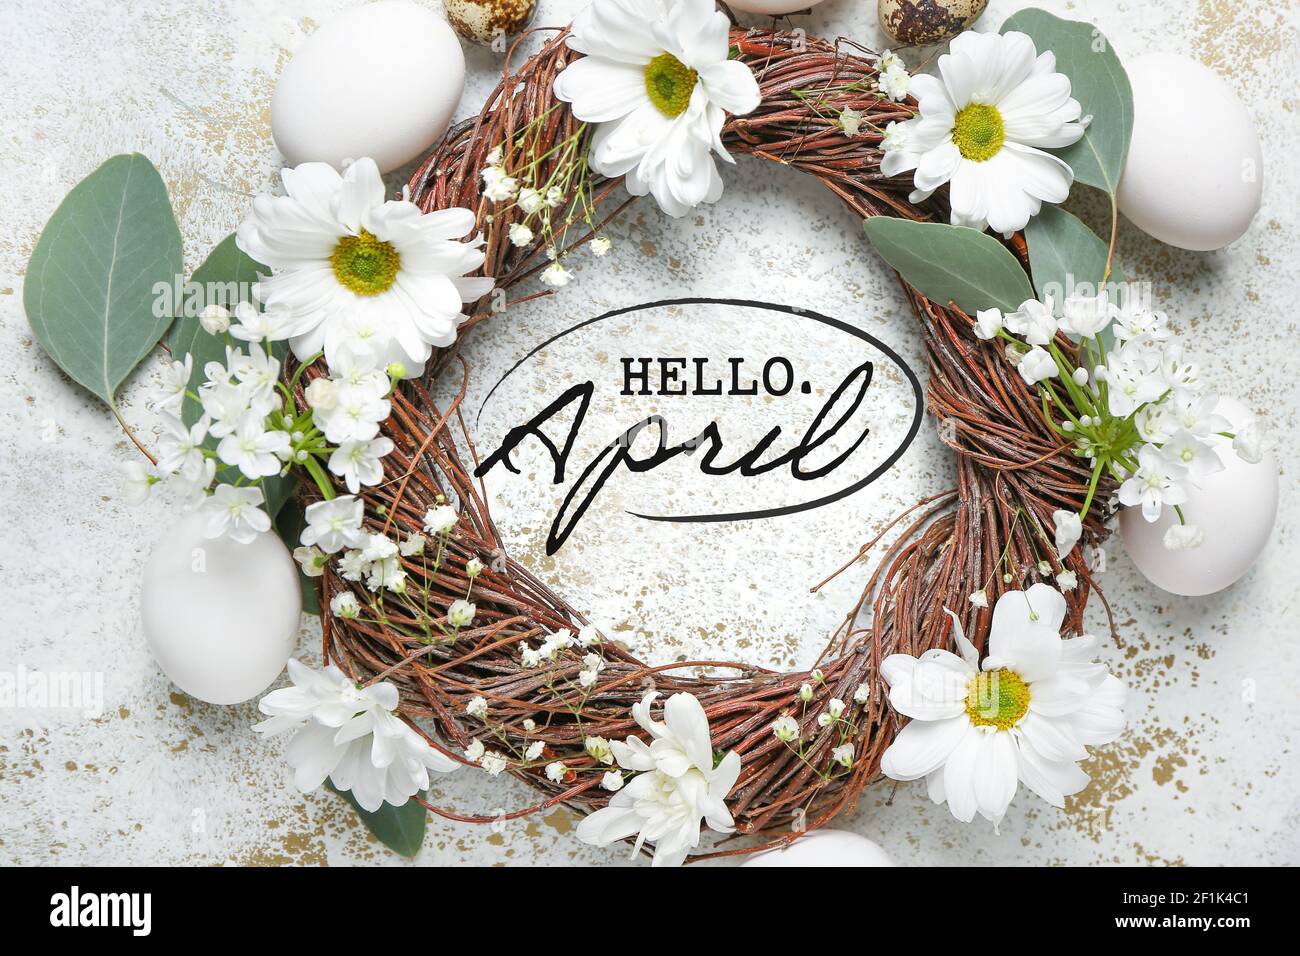 Composition with Easter eggs and spring flowers with text HELLO APRIL on light background Stock Photo